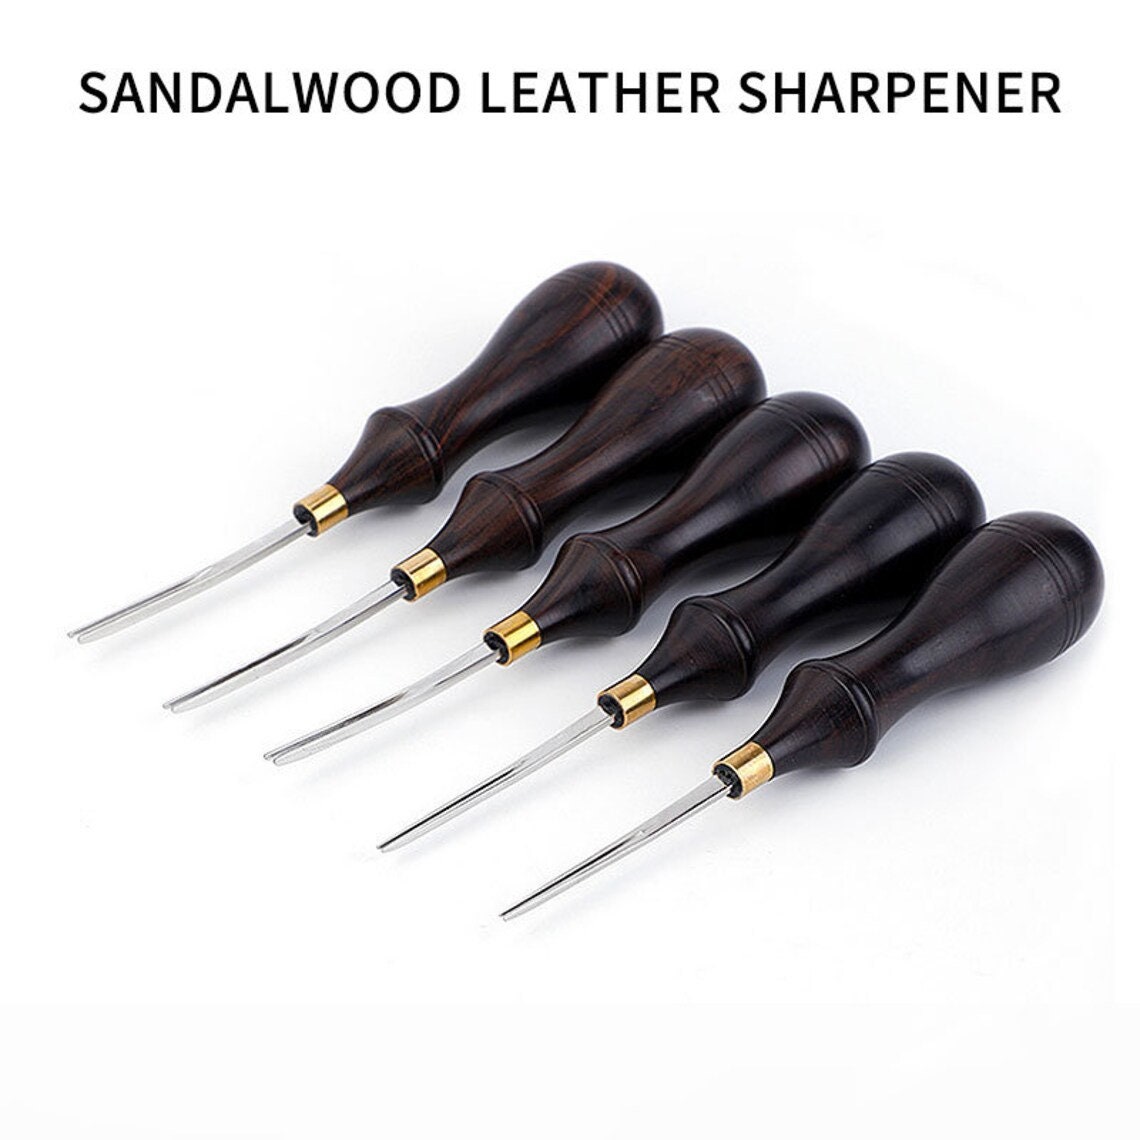  OWDEN Professional French Style Wide Mouth Skiving Tool,  Leather Edge bevelers Tool, leathercraft Tool （6.0mm).